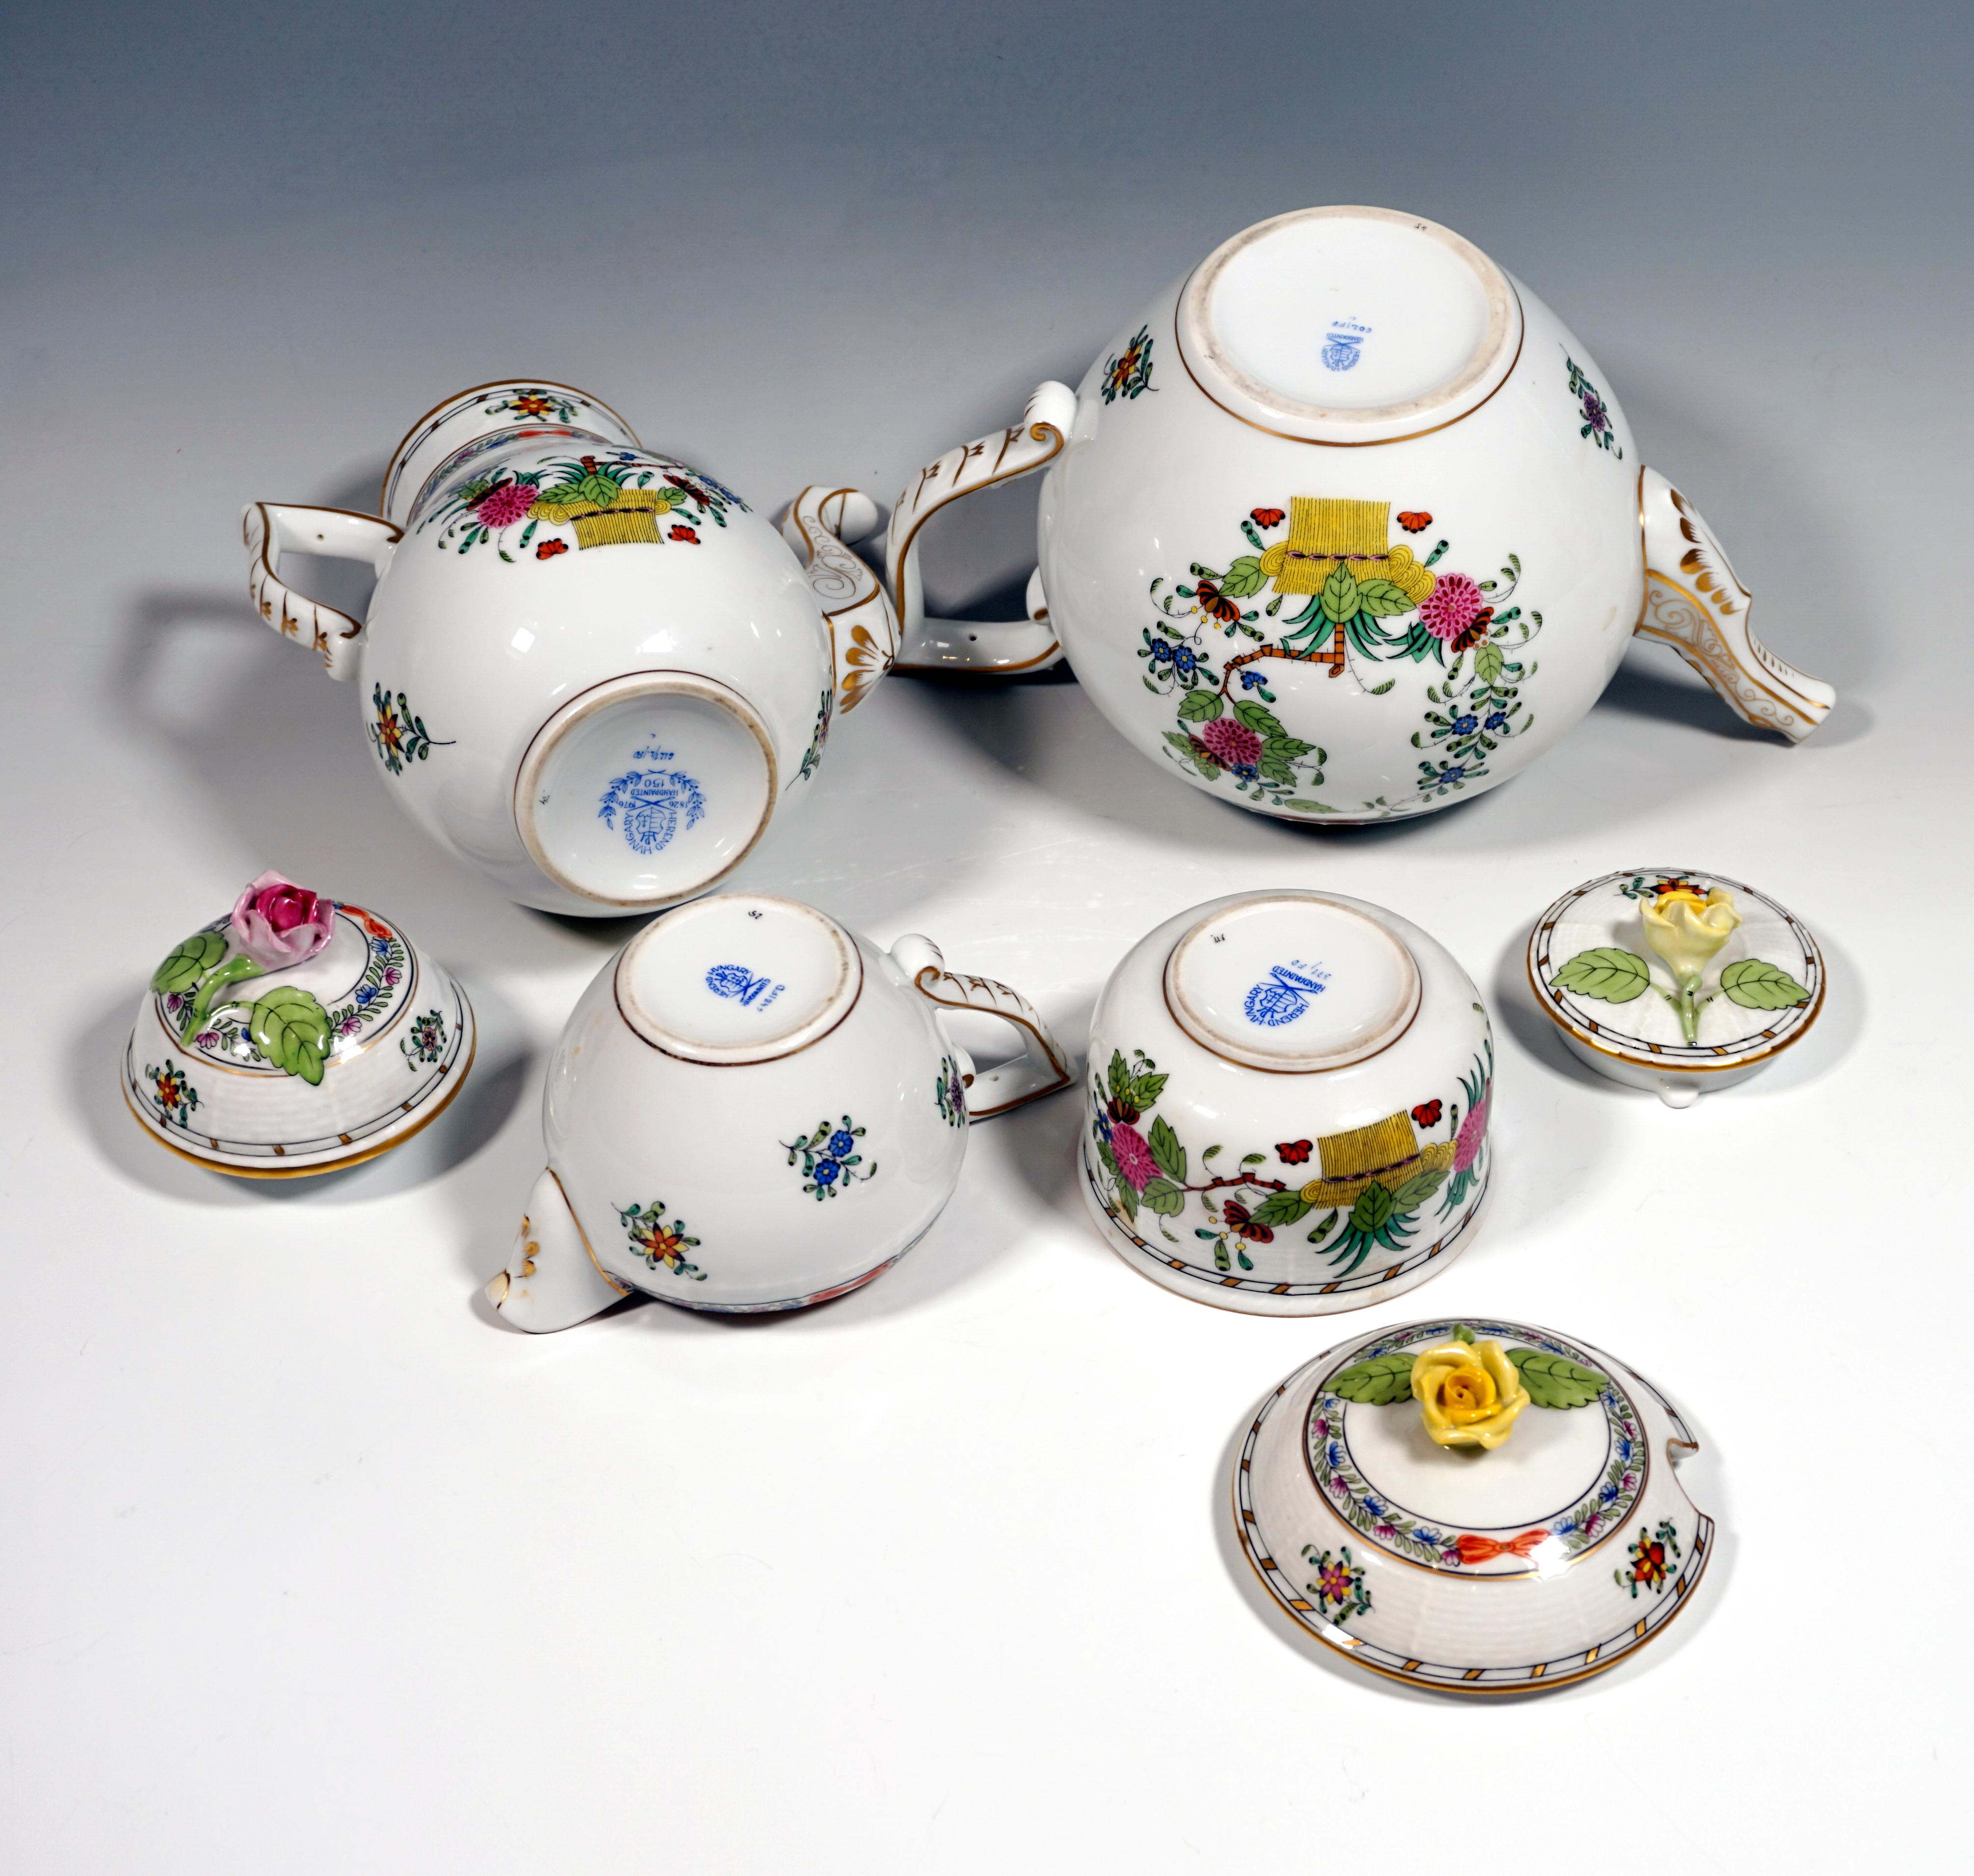 Hungarian Coffee and Tea Set for 8 Persons 'Fleurs des Indes' Herend Hungary, 20th Century